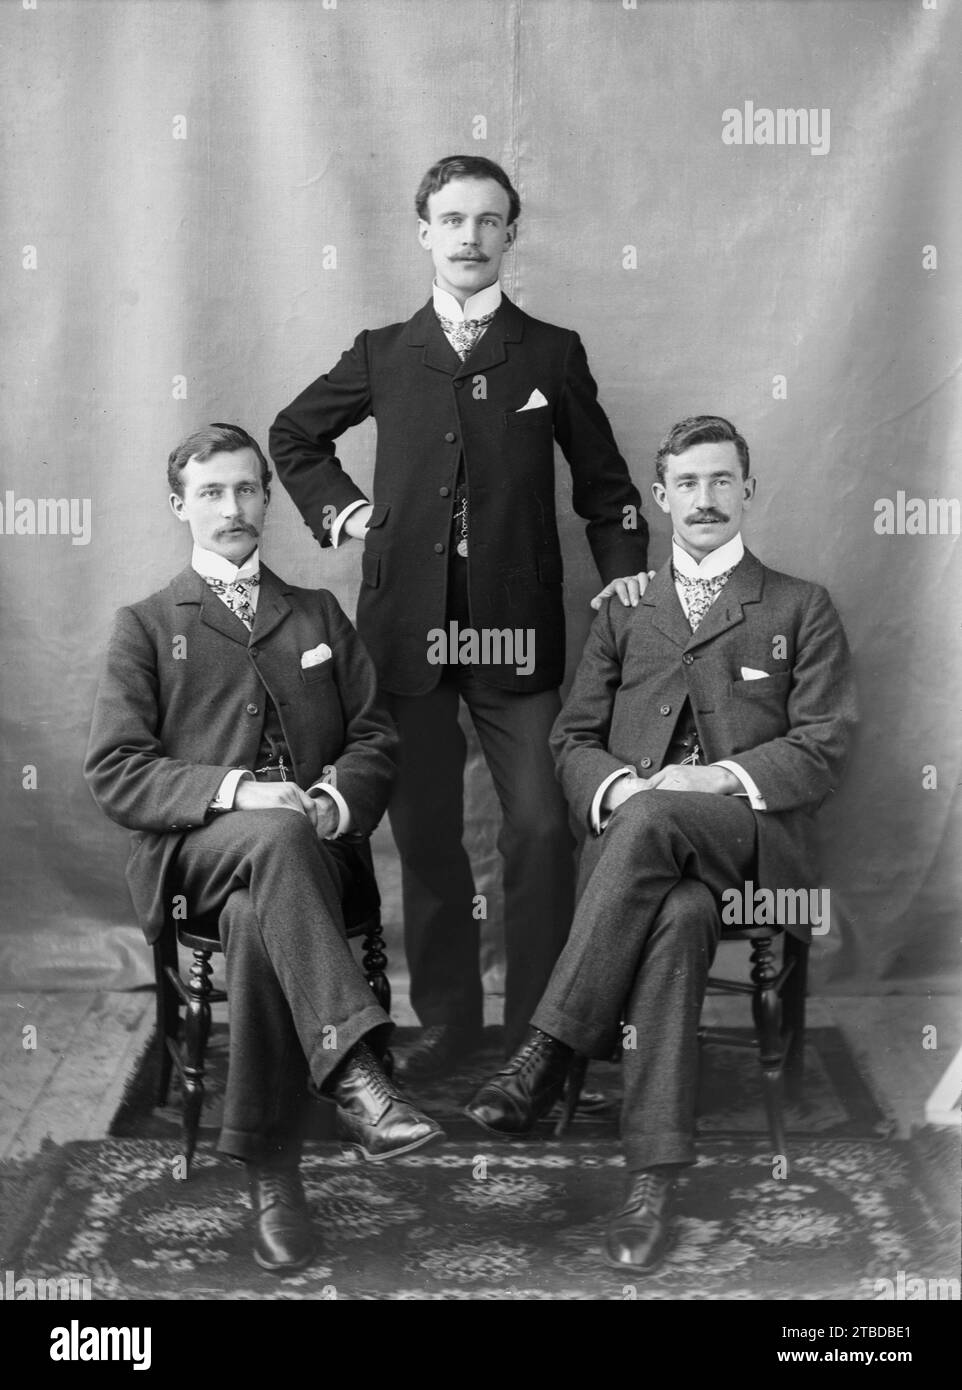 Edwardian formal studio portrait of three men in suits, two sitting and standing. Cravats and stiff collars.  Taken from a vintage glass plate negative.  C1900 – 1910 Stock Photo